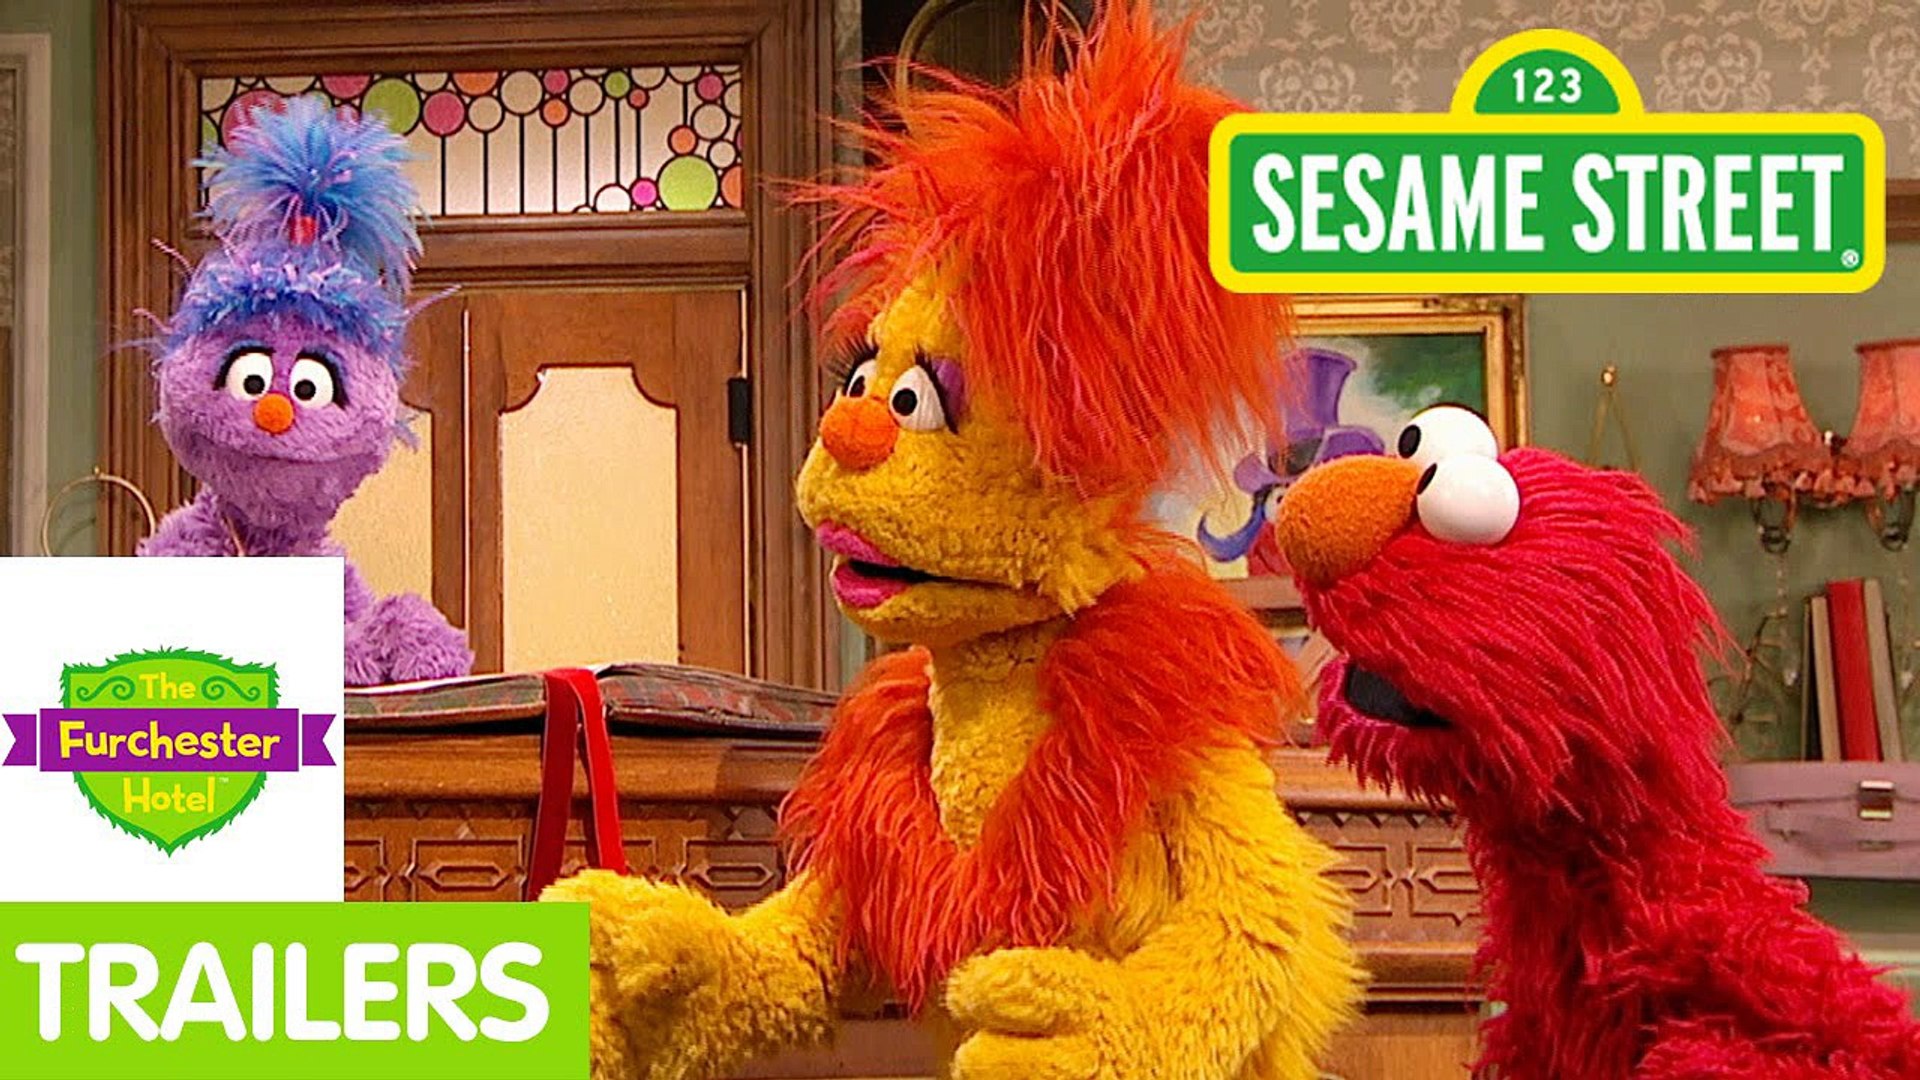 Furchester Hotel: Elmo and the Pony in Disguise (Full Episode) -  Dailymotion Video